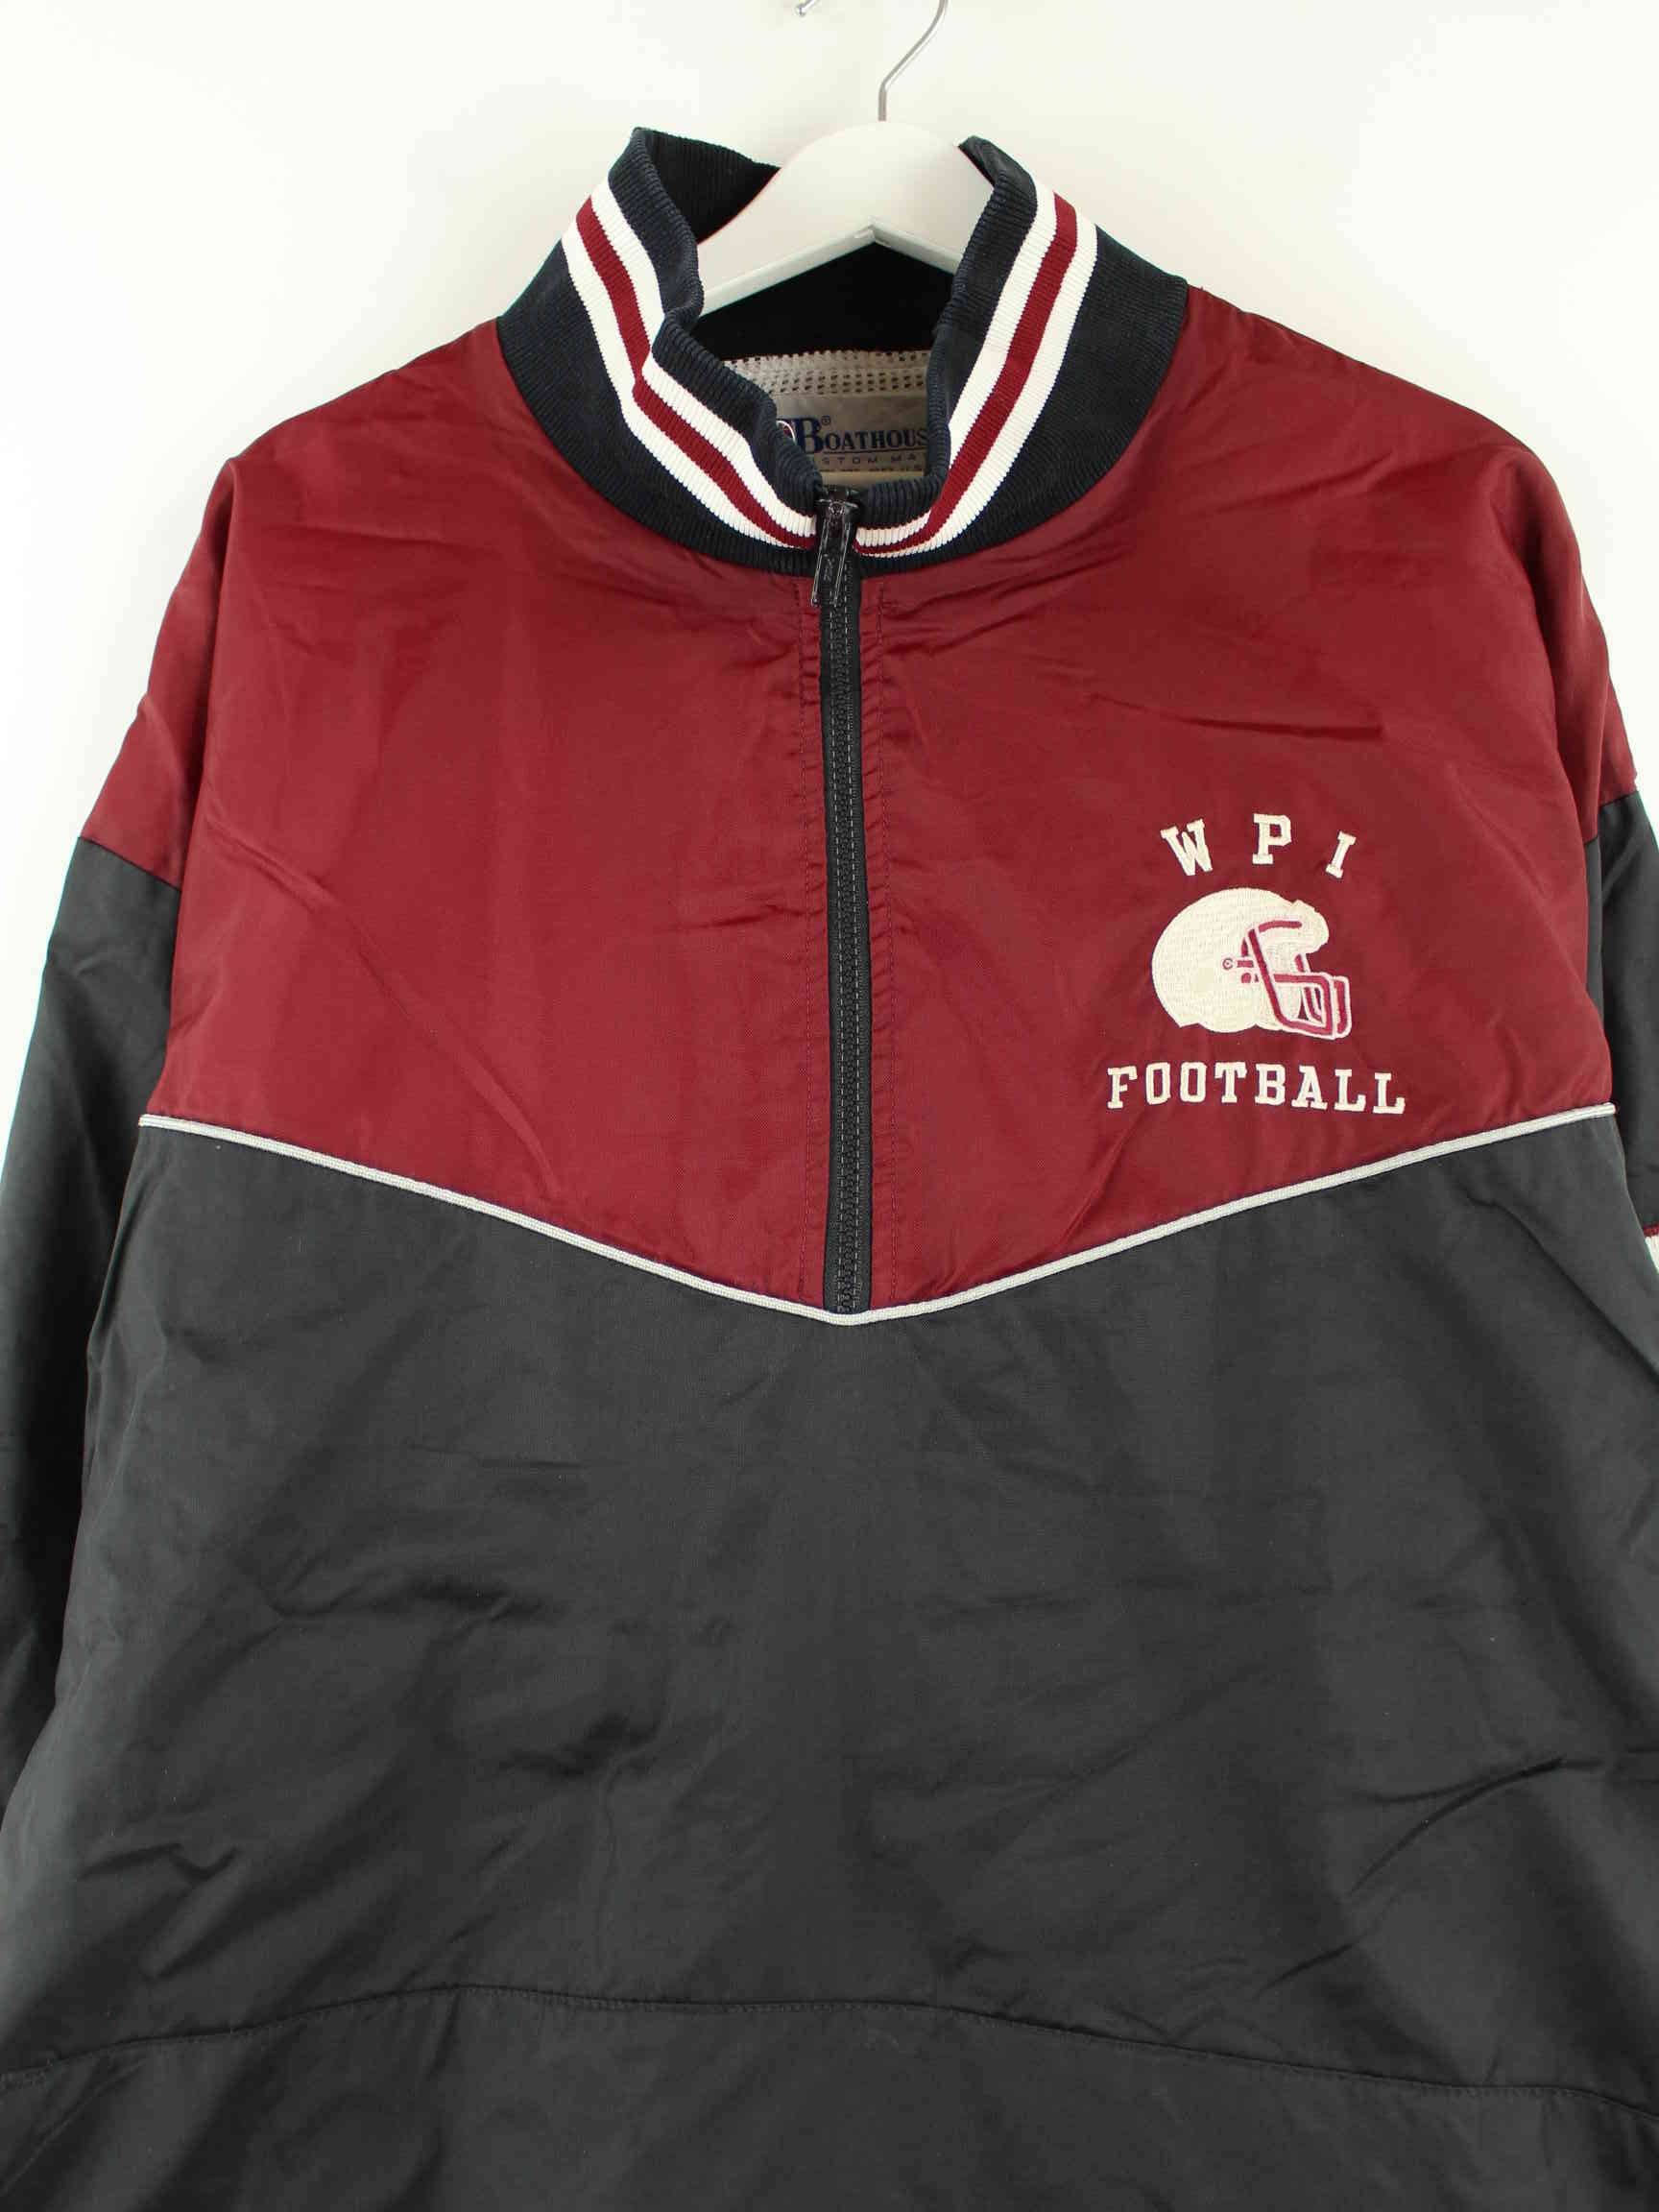 Vintage 90s Embroidered Football Coach Jacke Rot XL (detail image 1)